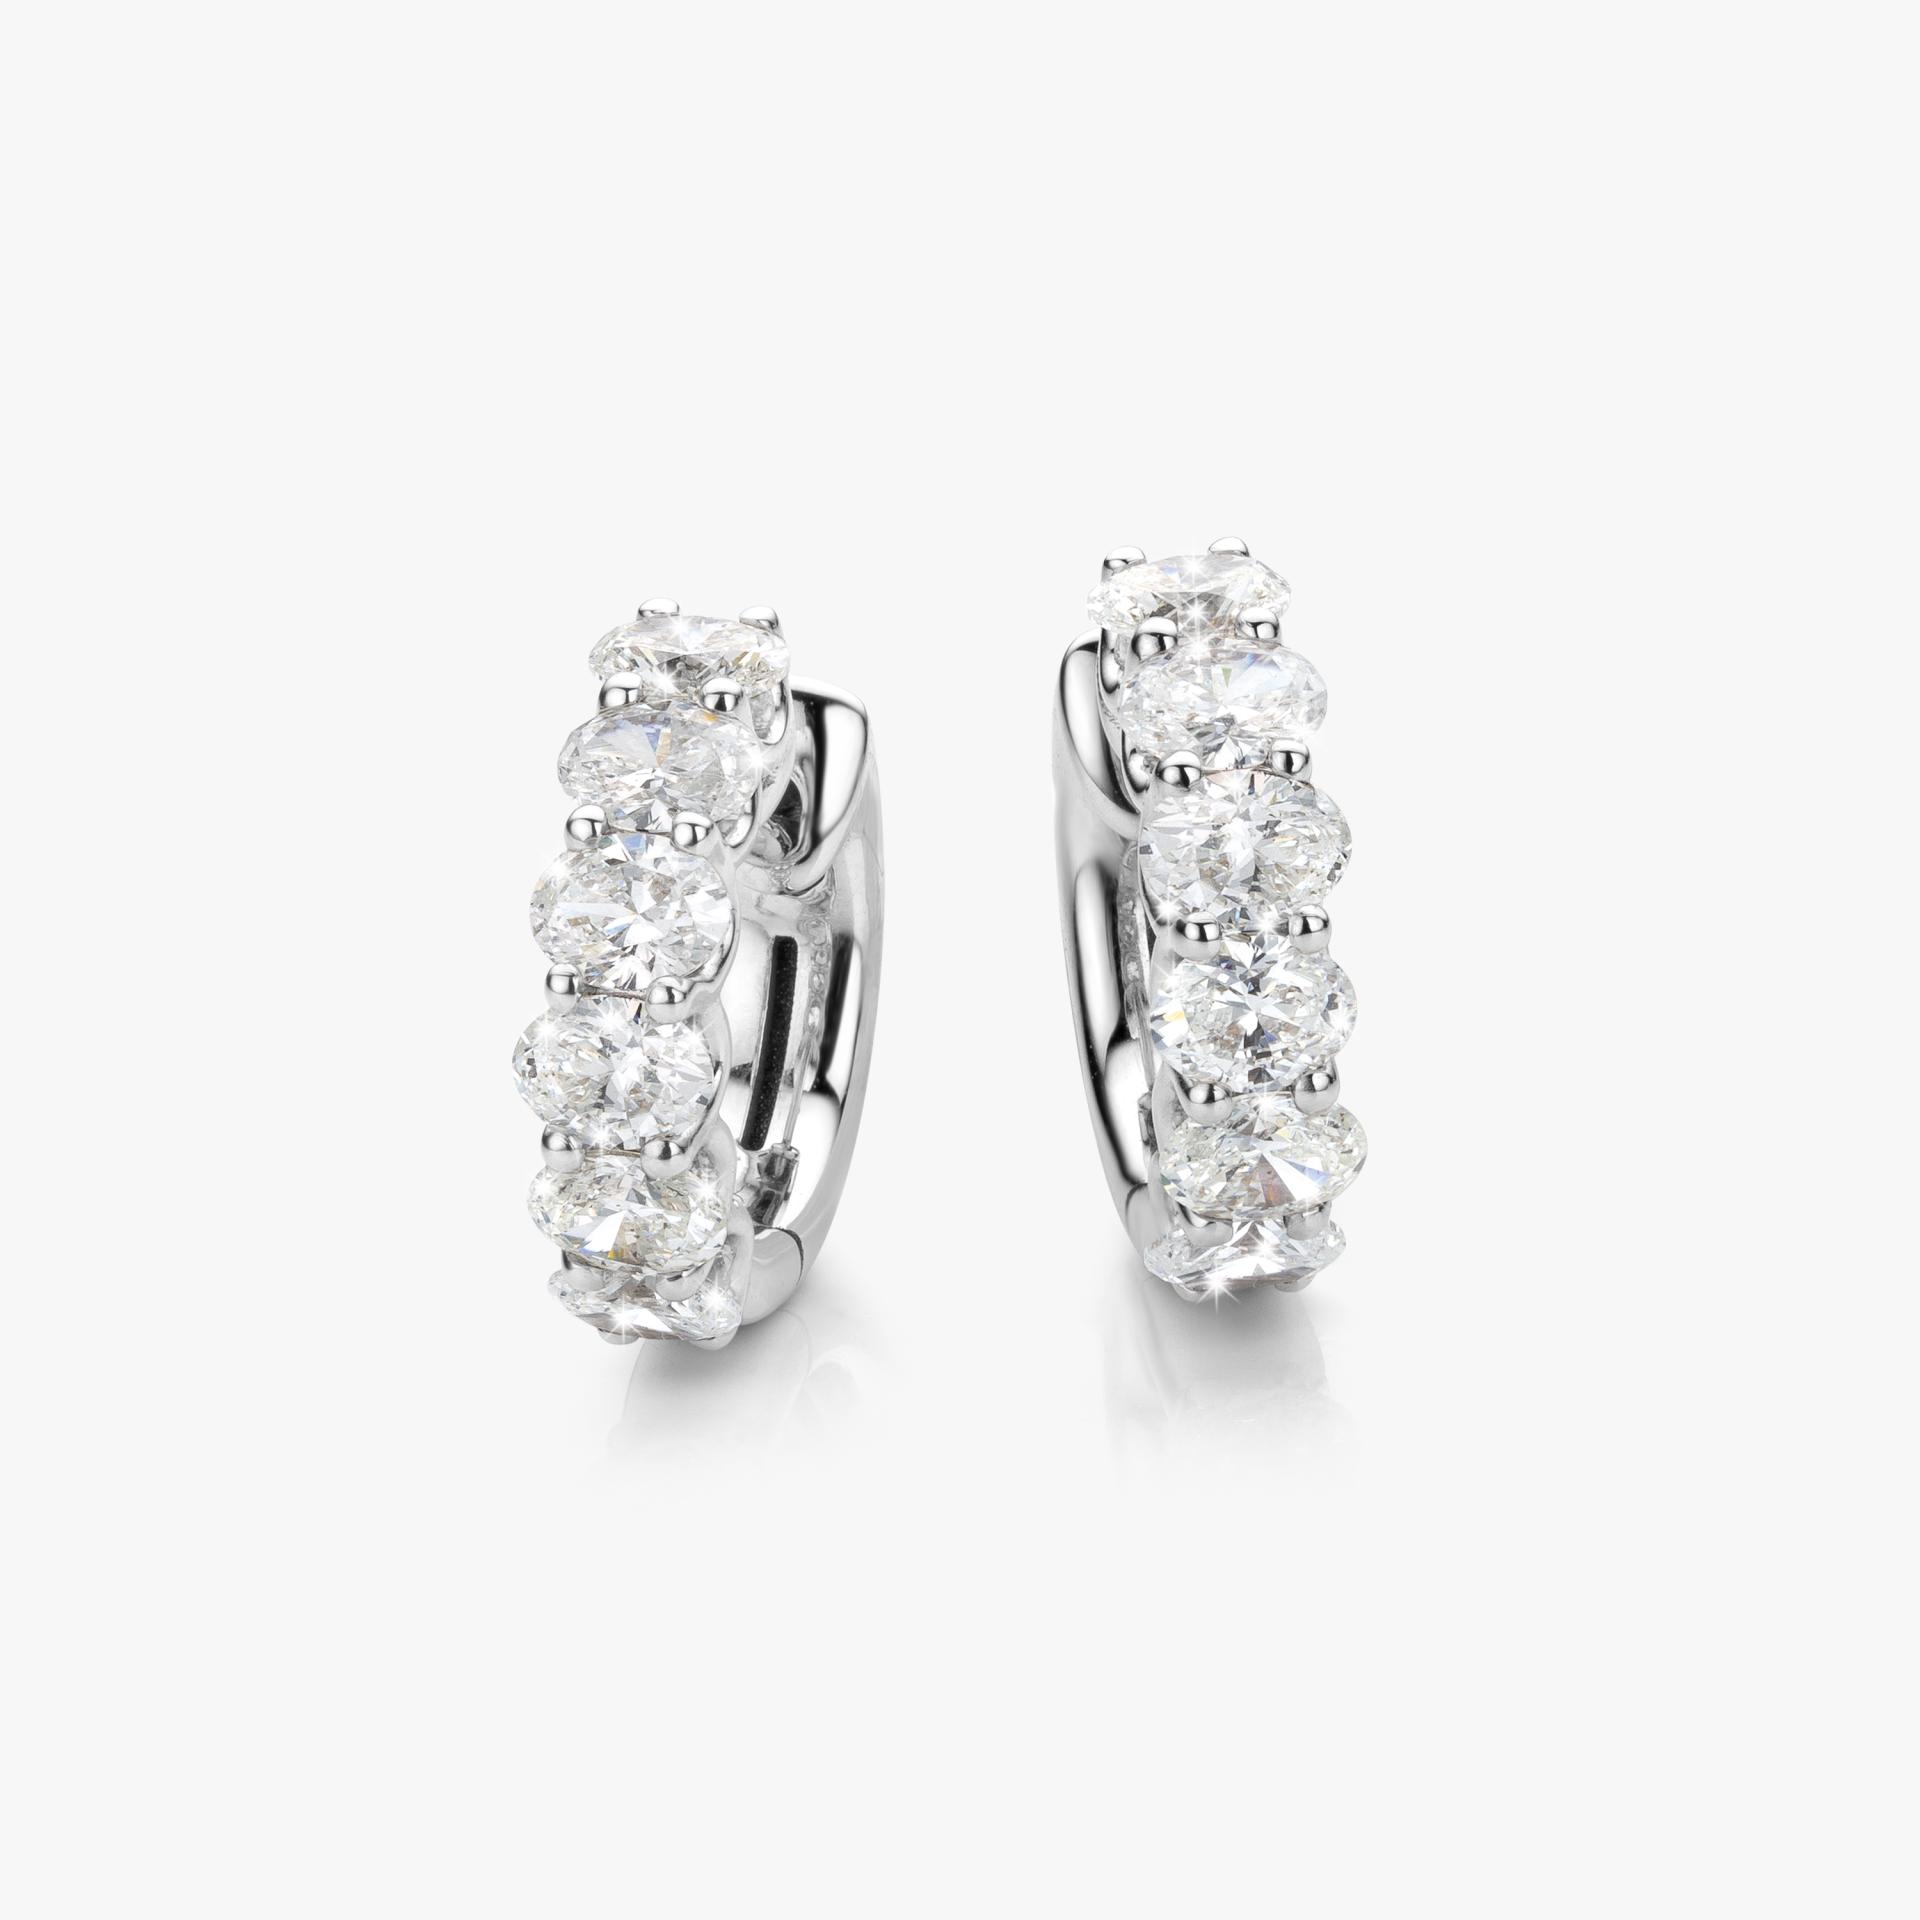 White gold earrings set with oval shaped diamonds made by Maison De Greef